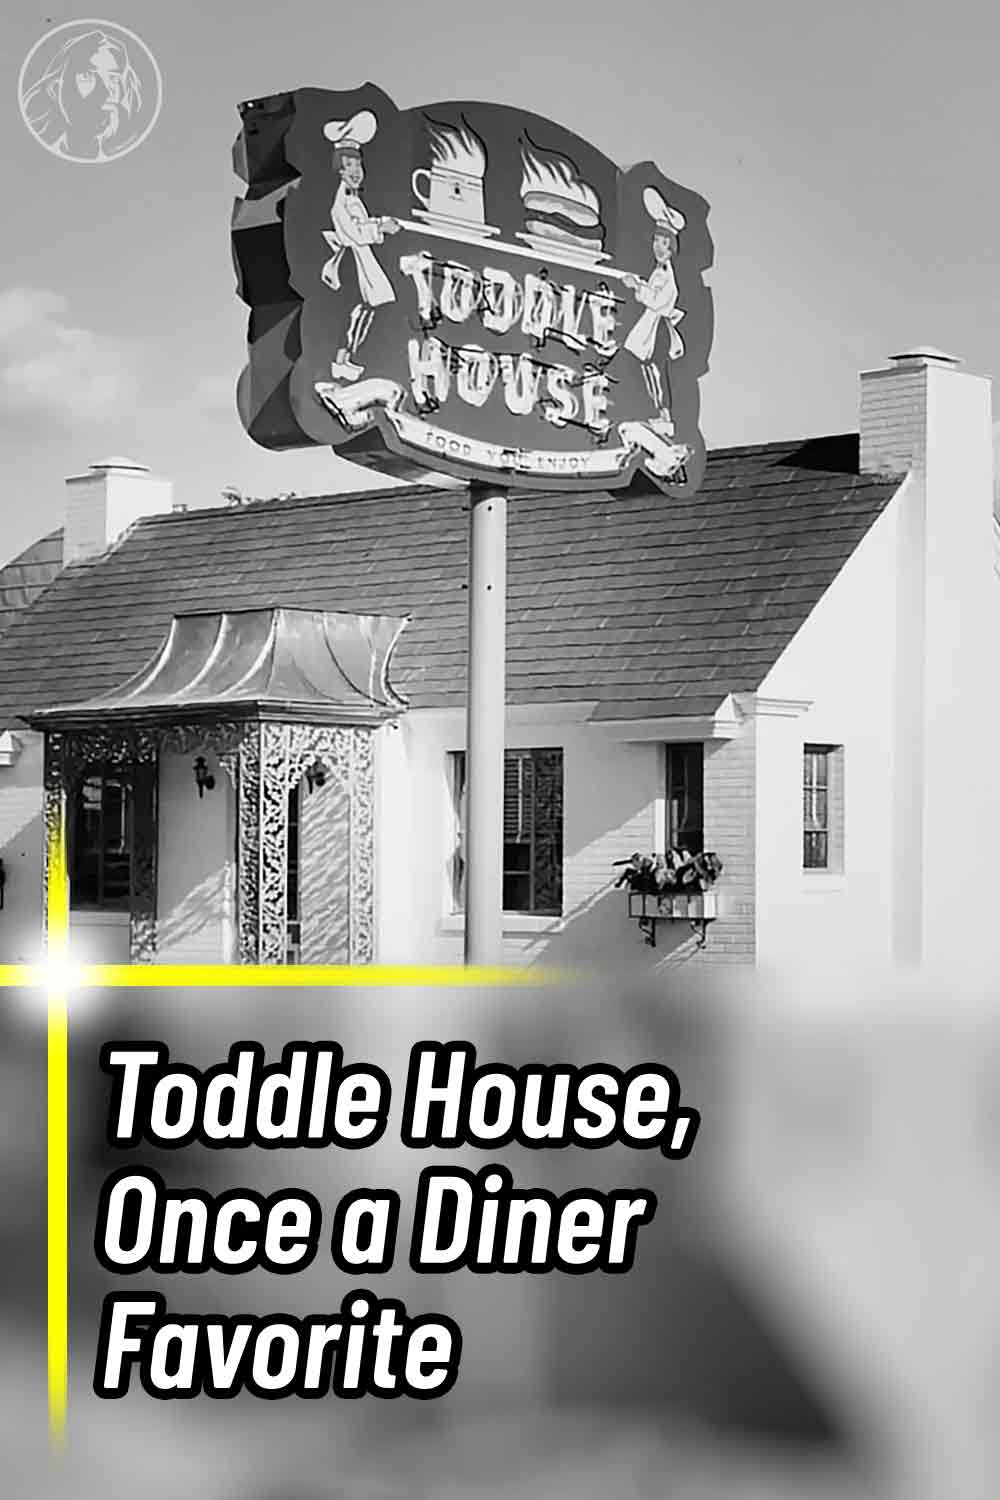 Toddle House, Once a Diner Favorite